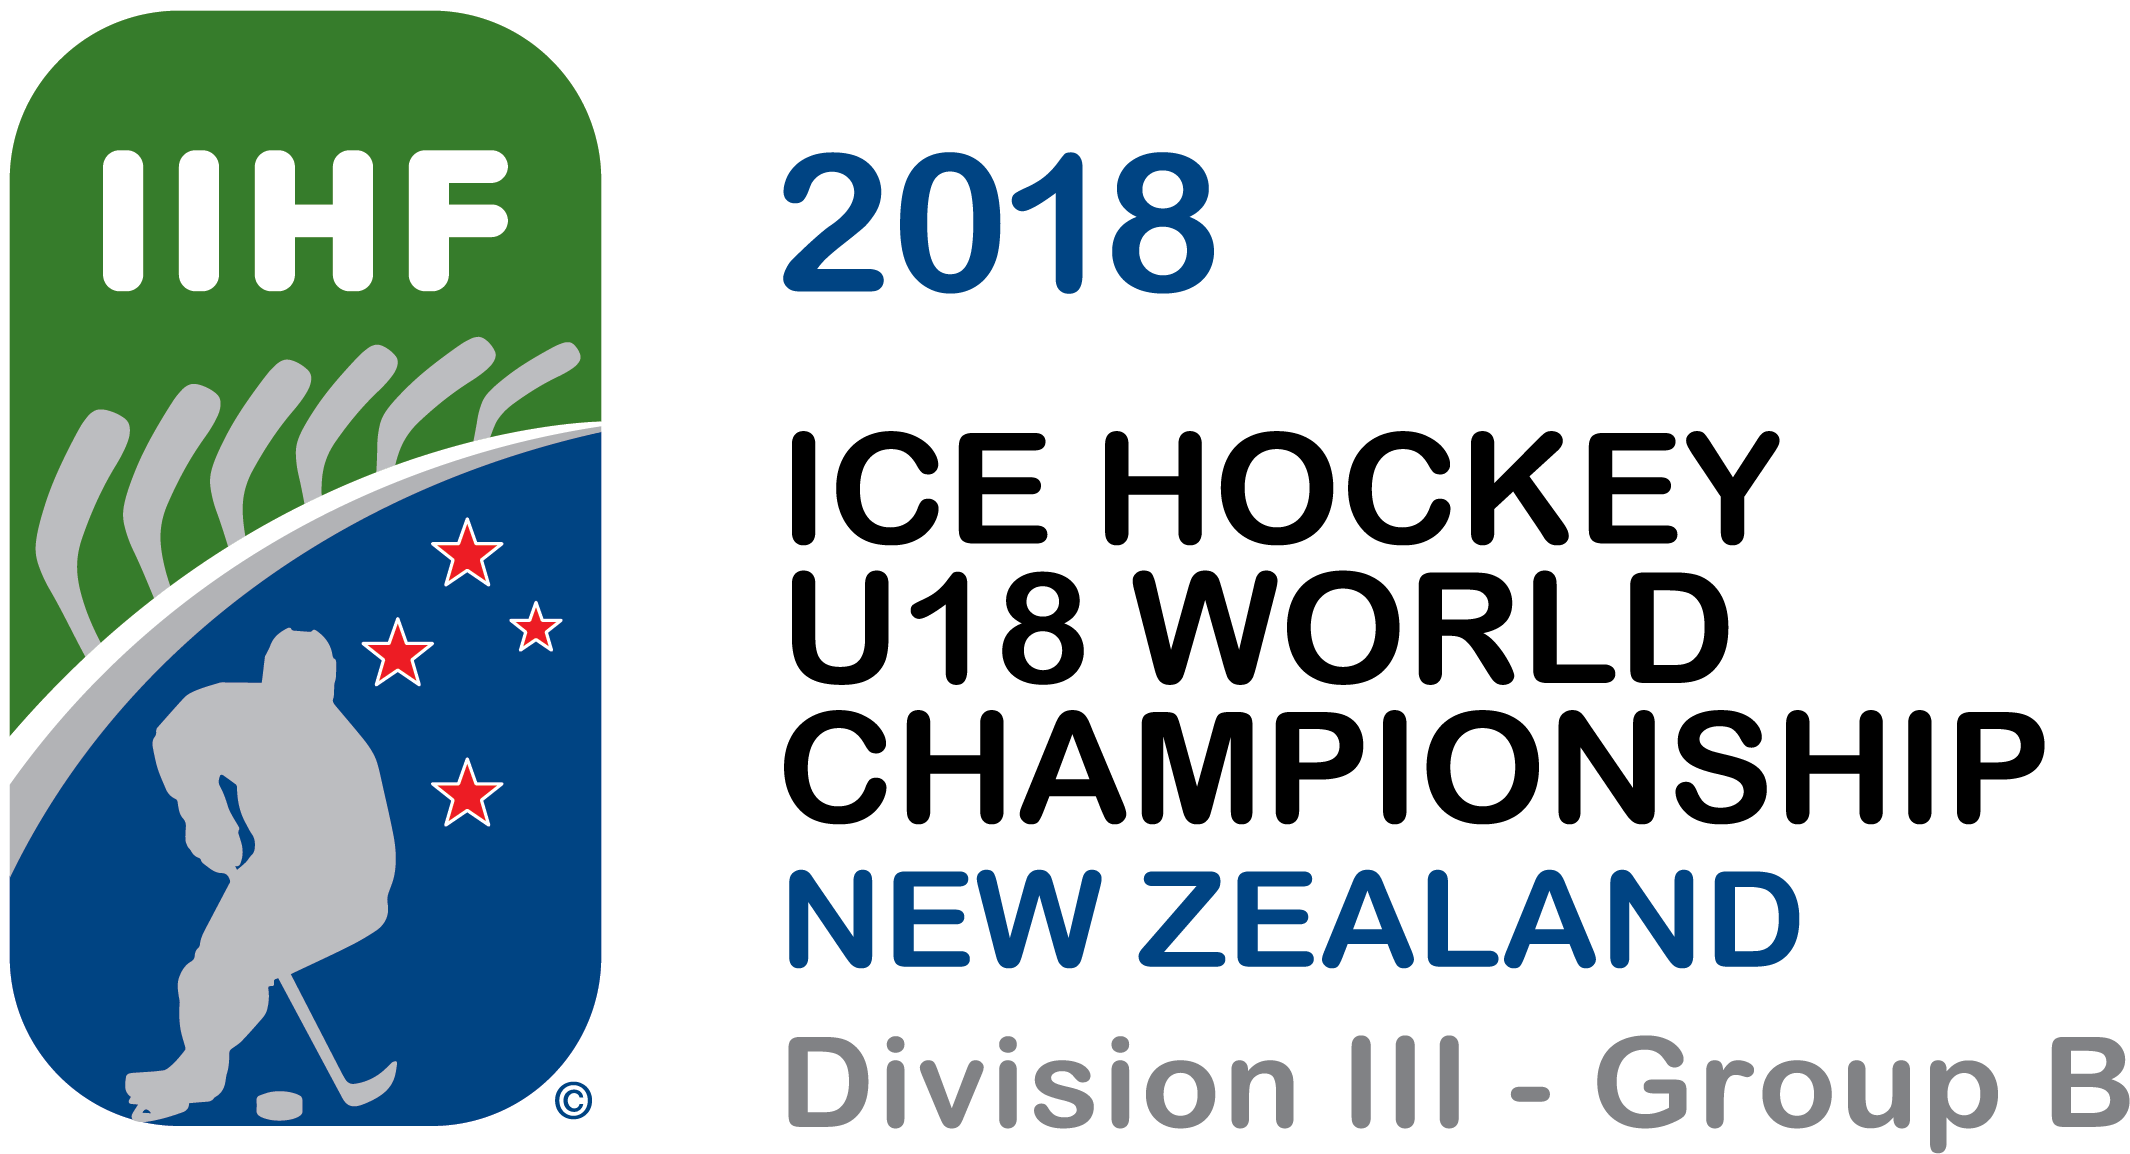 U18 World Championship Division III Group A - Queenstown